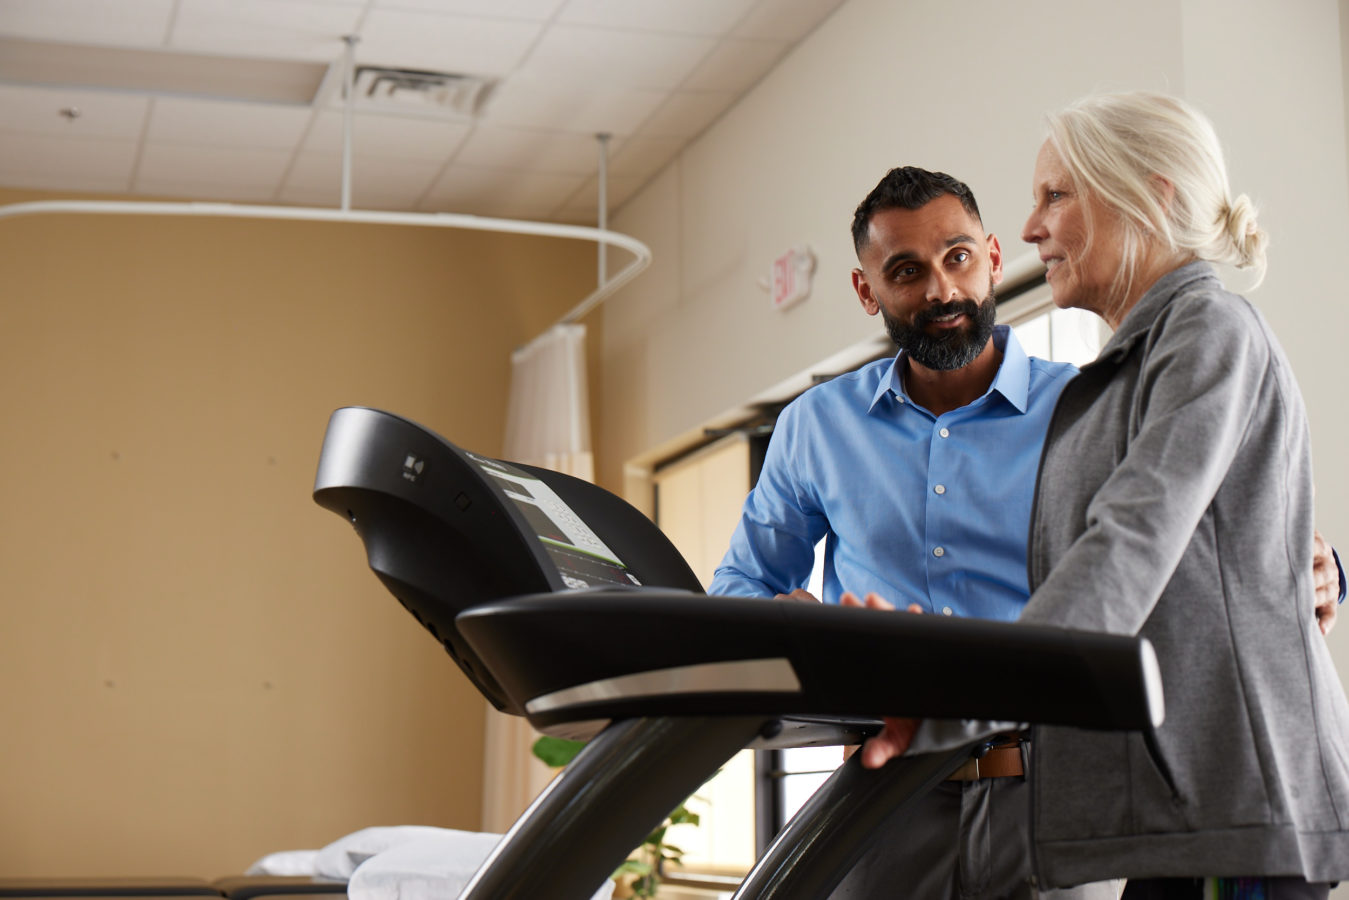 older woman walking on a treadmill with male physical therapist standing next to her